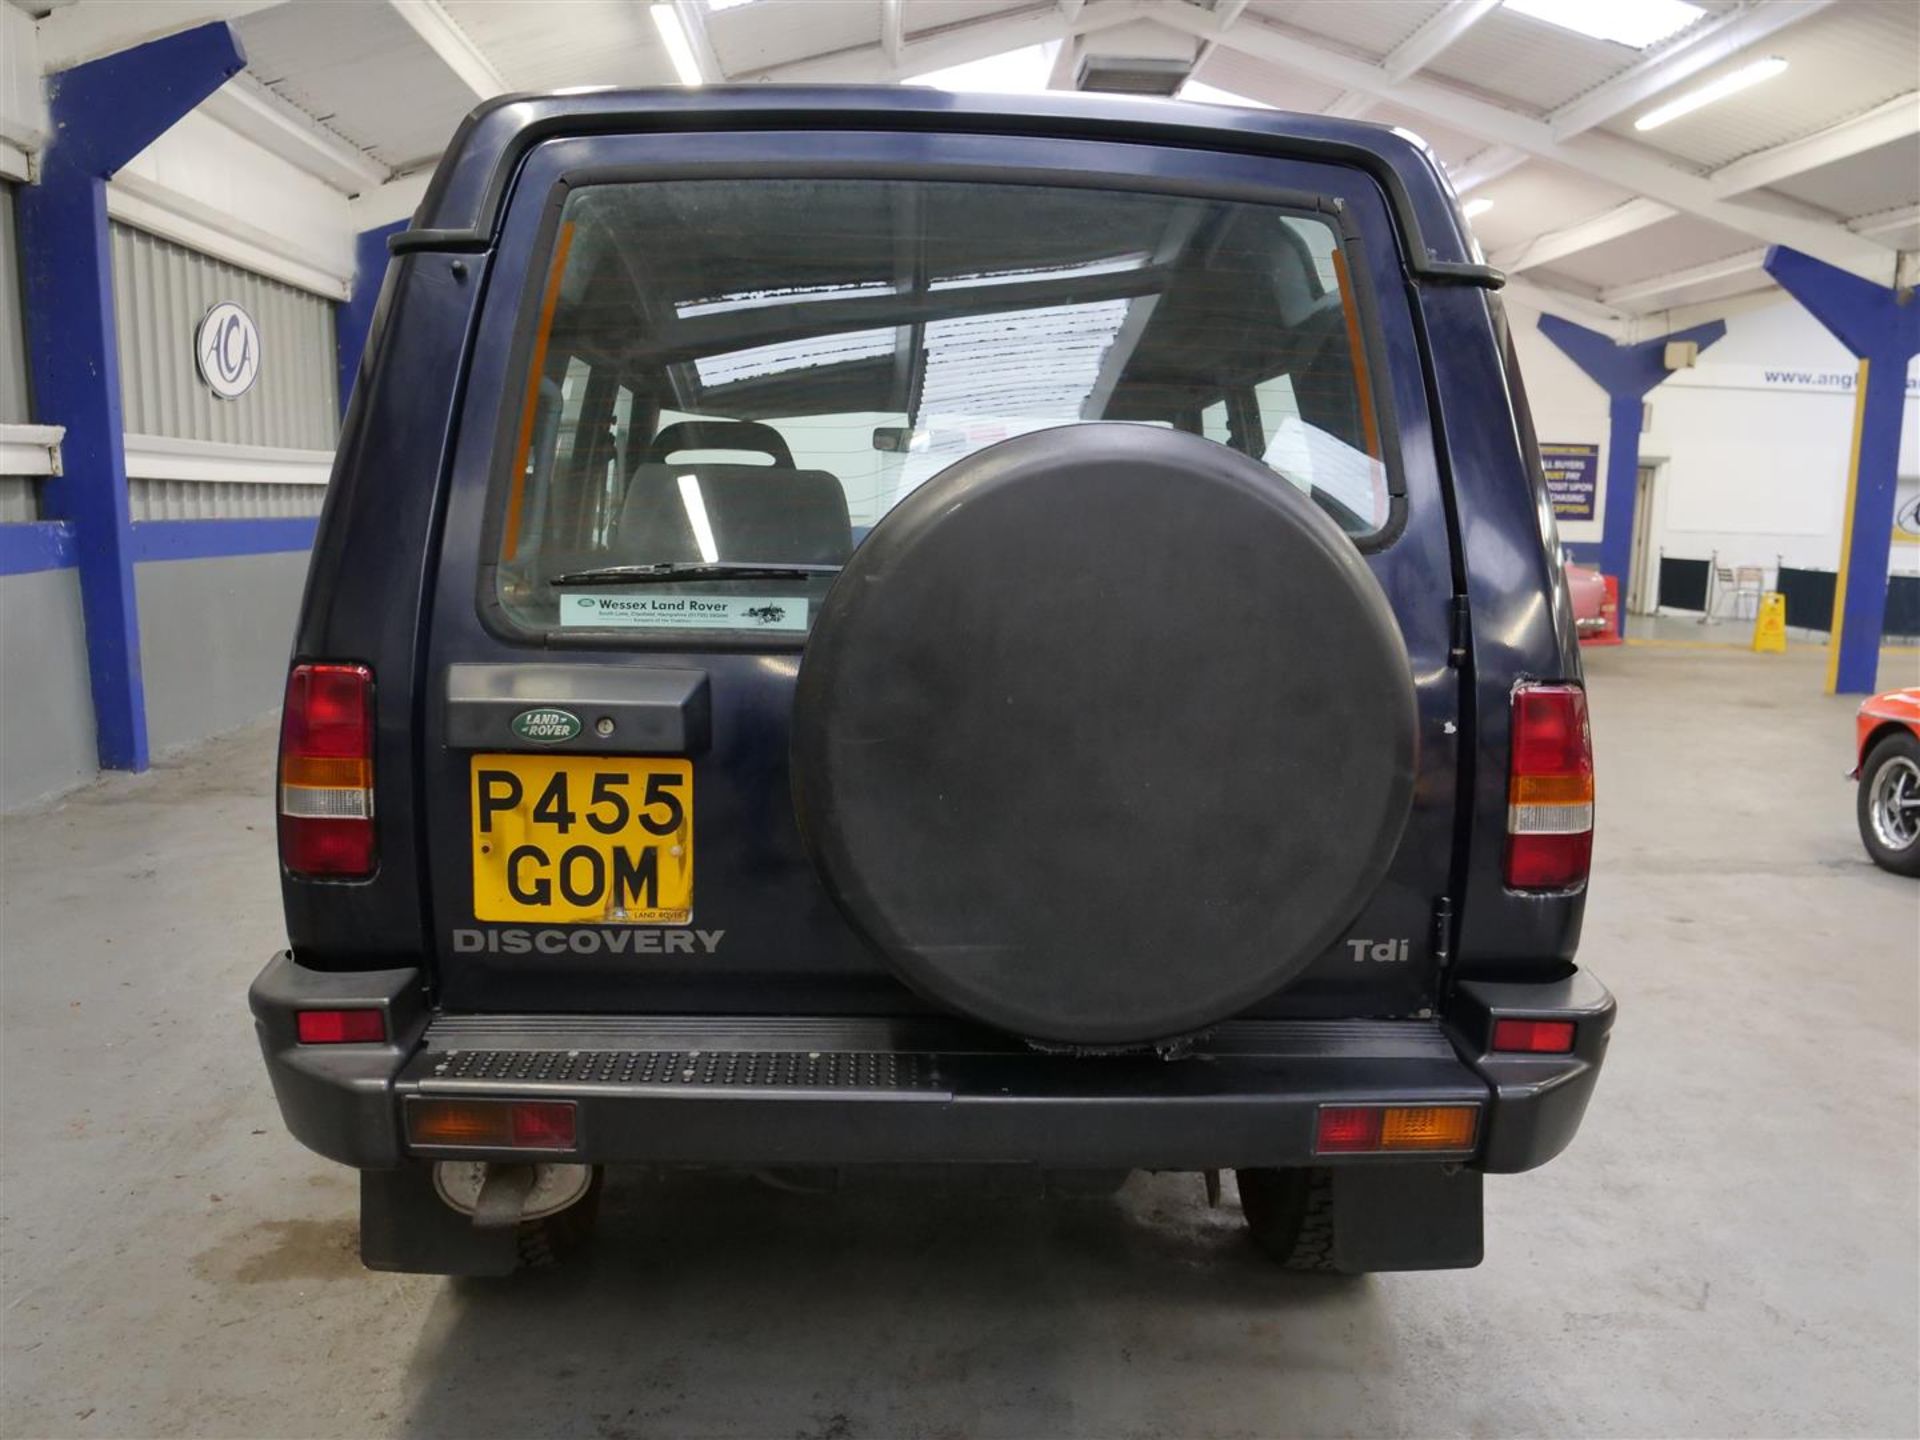 1996 Land Rover Discovery 2.5 TDI - Image 3 of 30